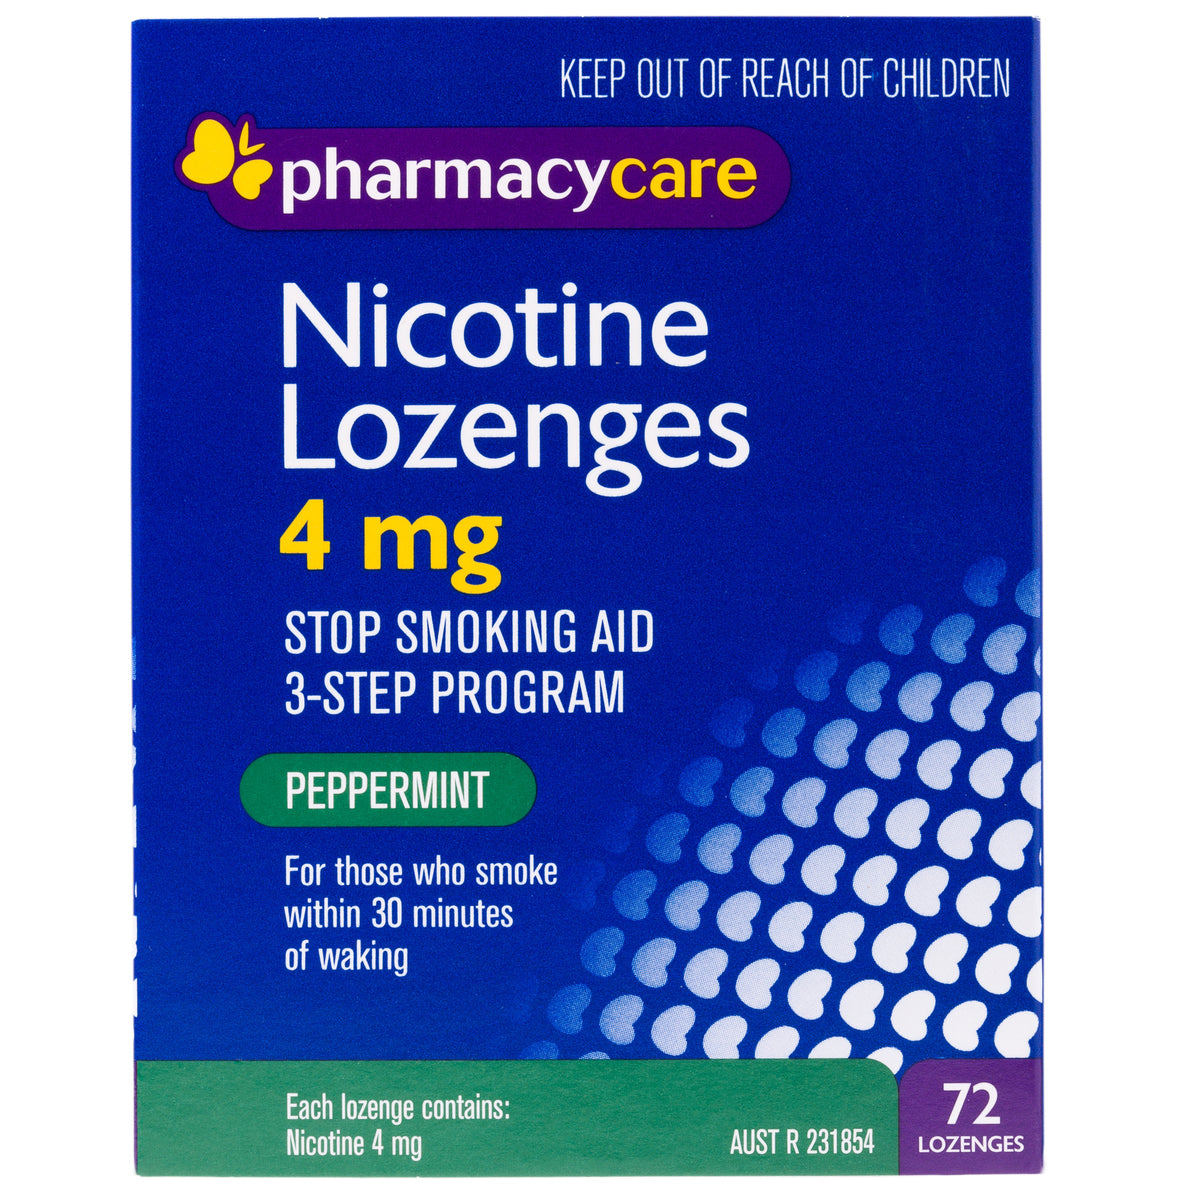 Pharmacy Care Nicotine Lozenges 4 mg Peppermint - 72 Pack